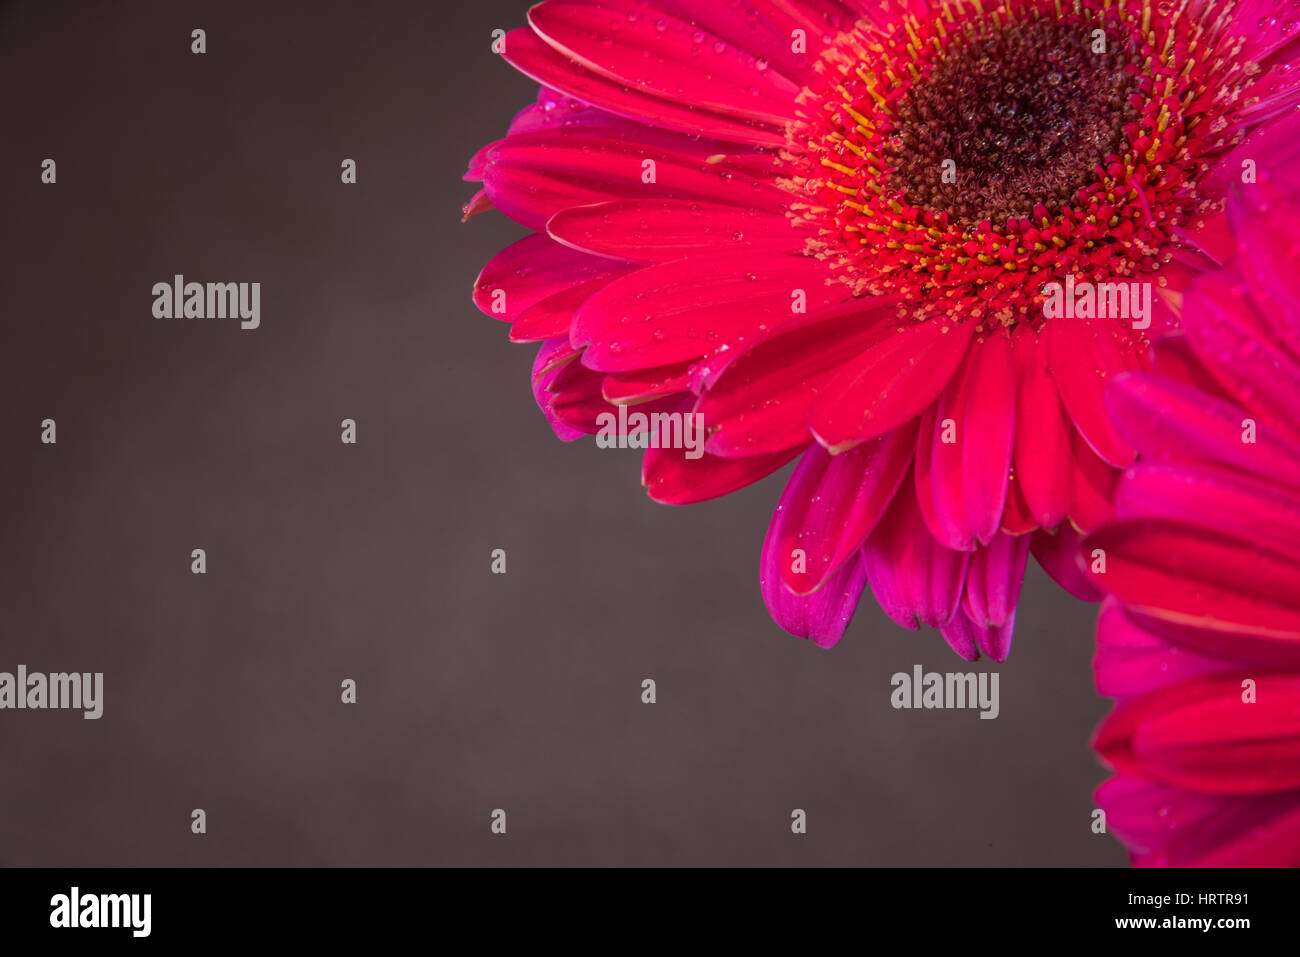 Closeup of a beautiful bright pink gerbera daisy flower in the dark background Stock Photo